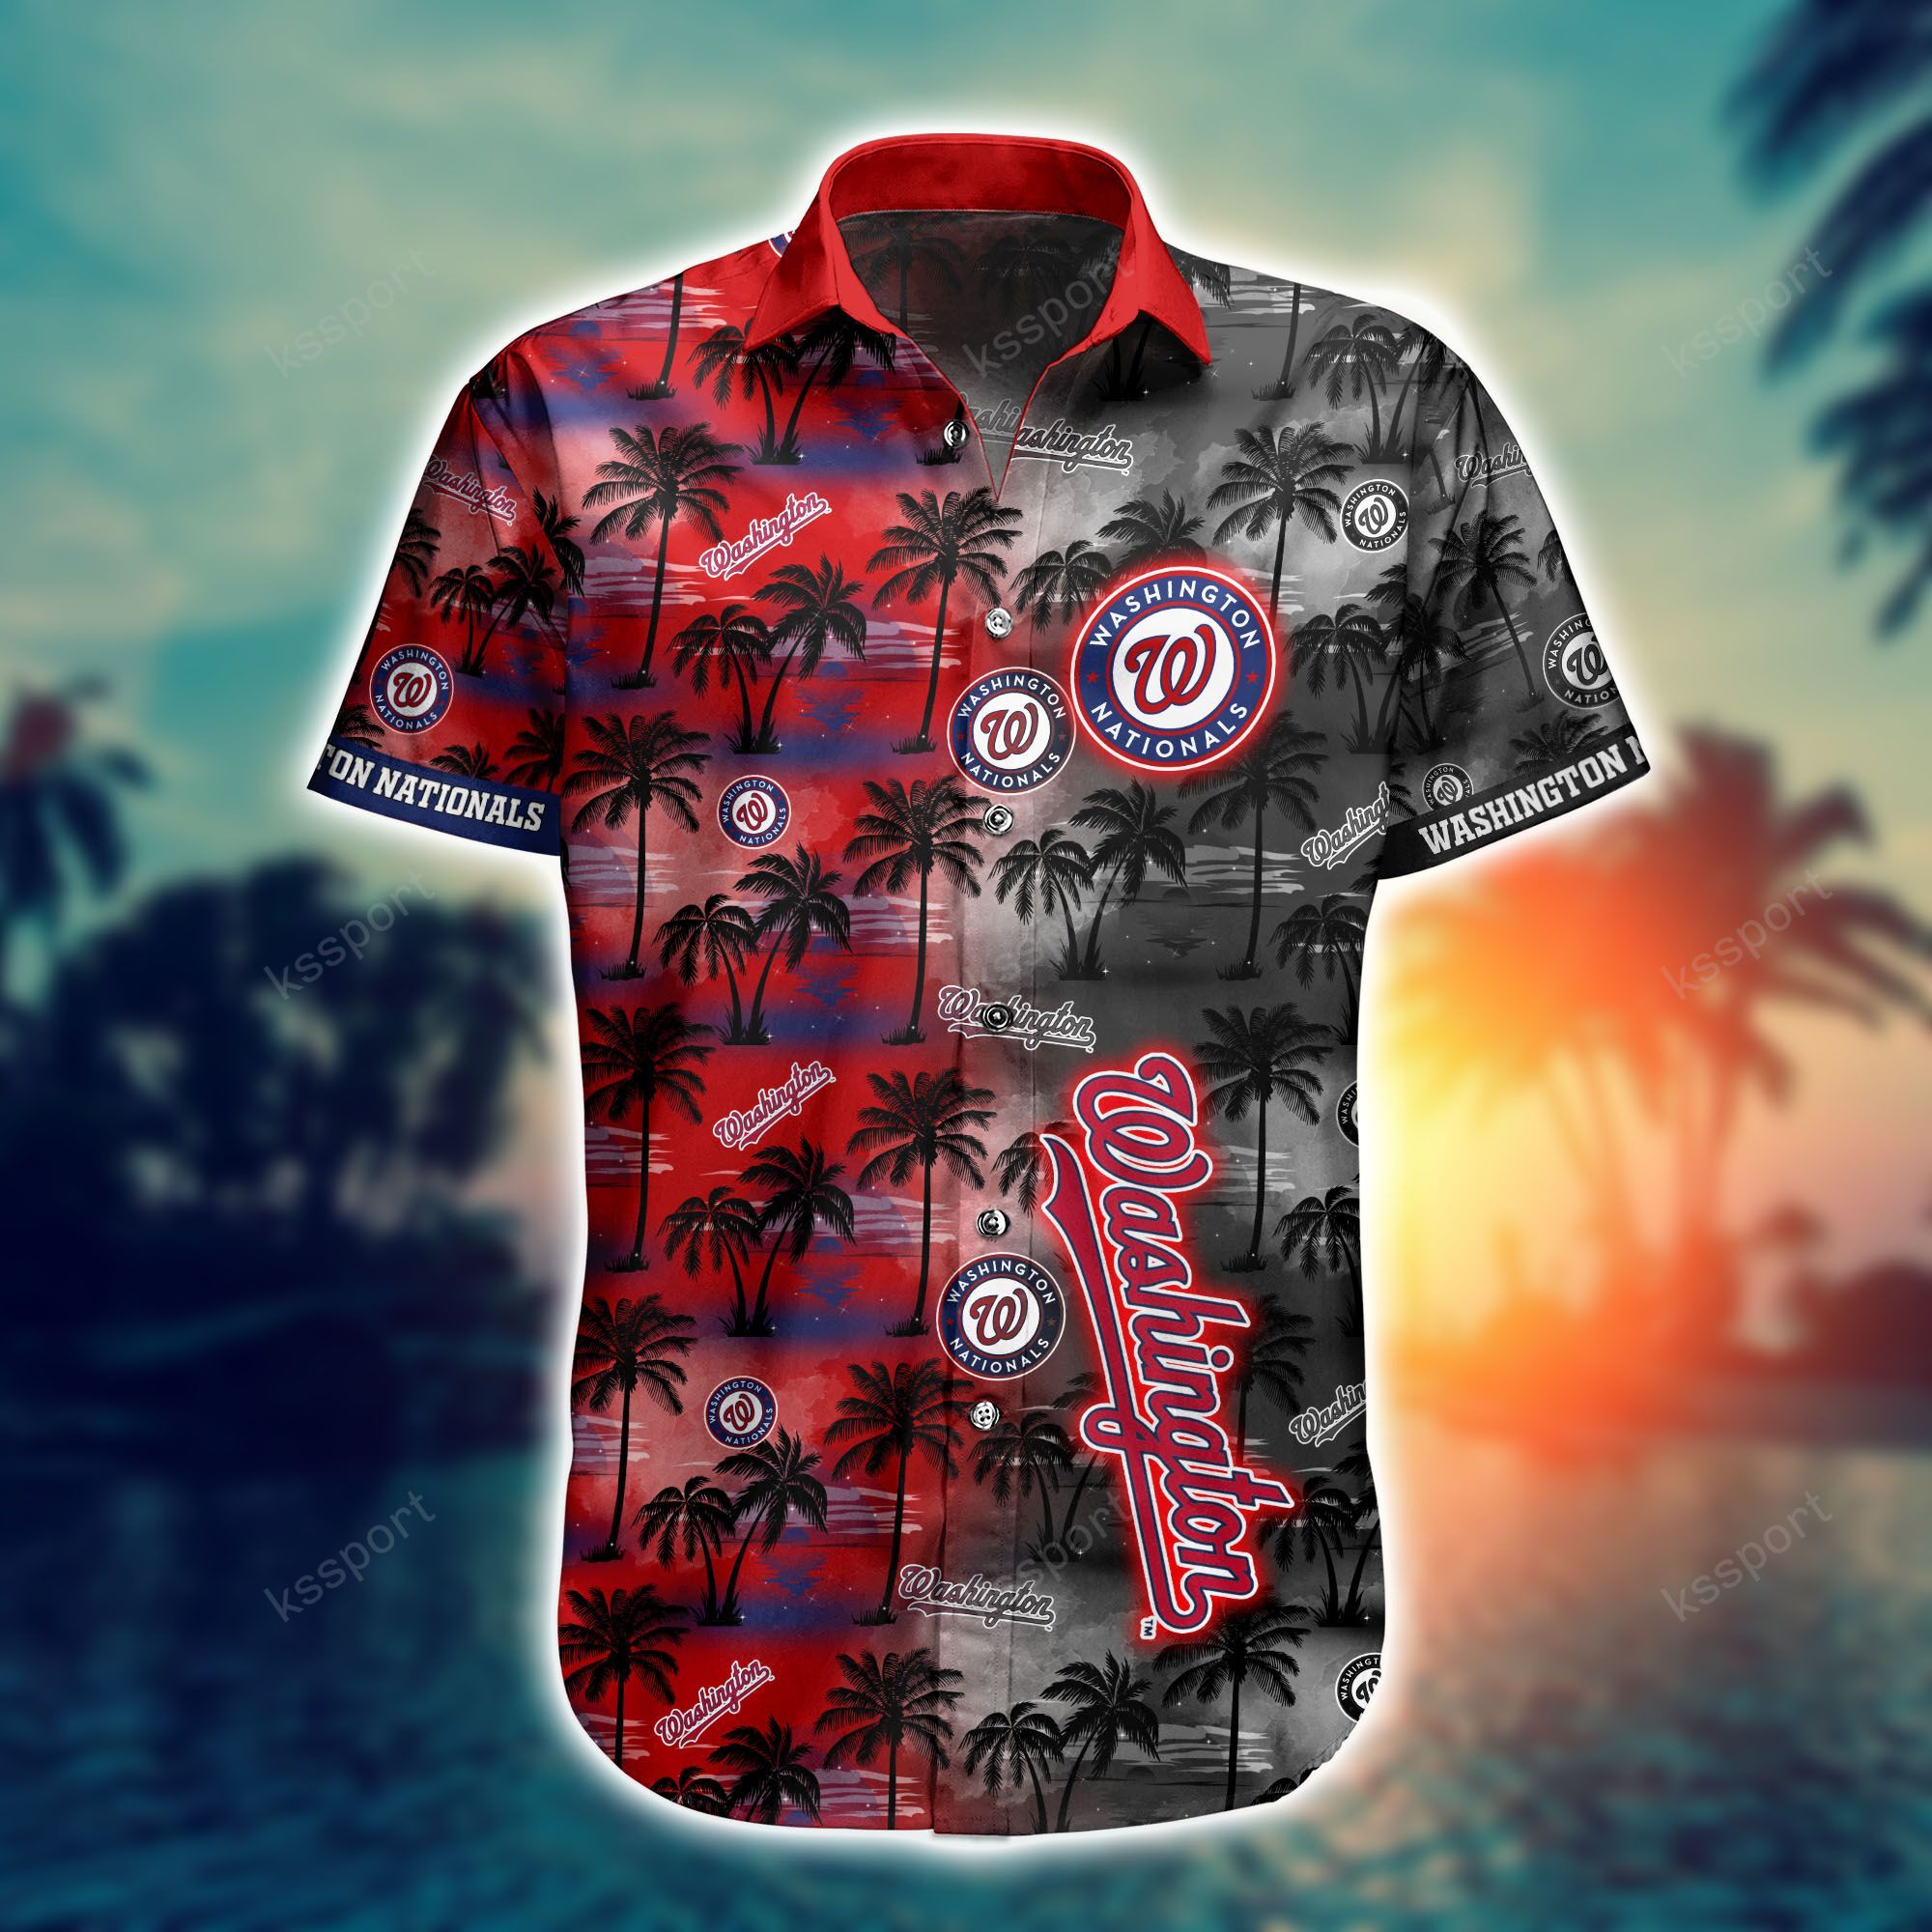 Top cool Hawaiian shirt 2022 - Make sure you get yours today before they run out! 223